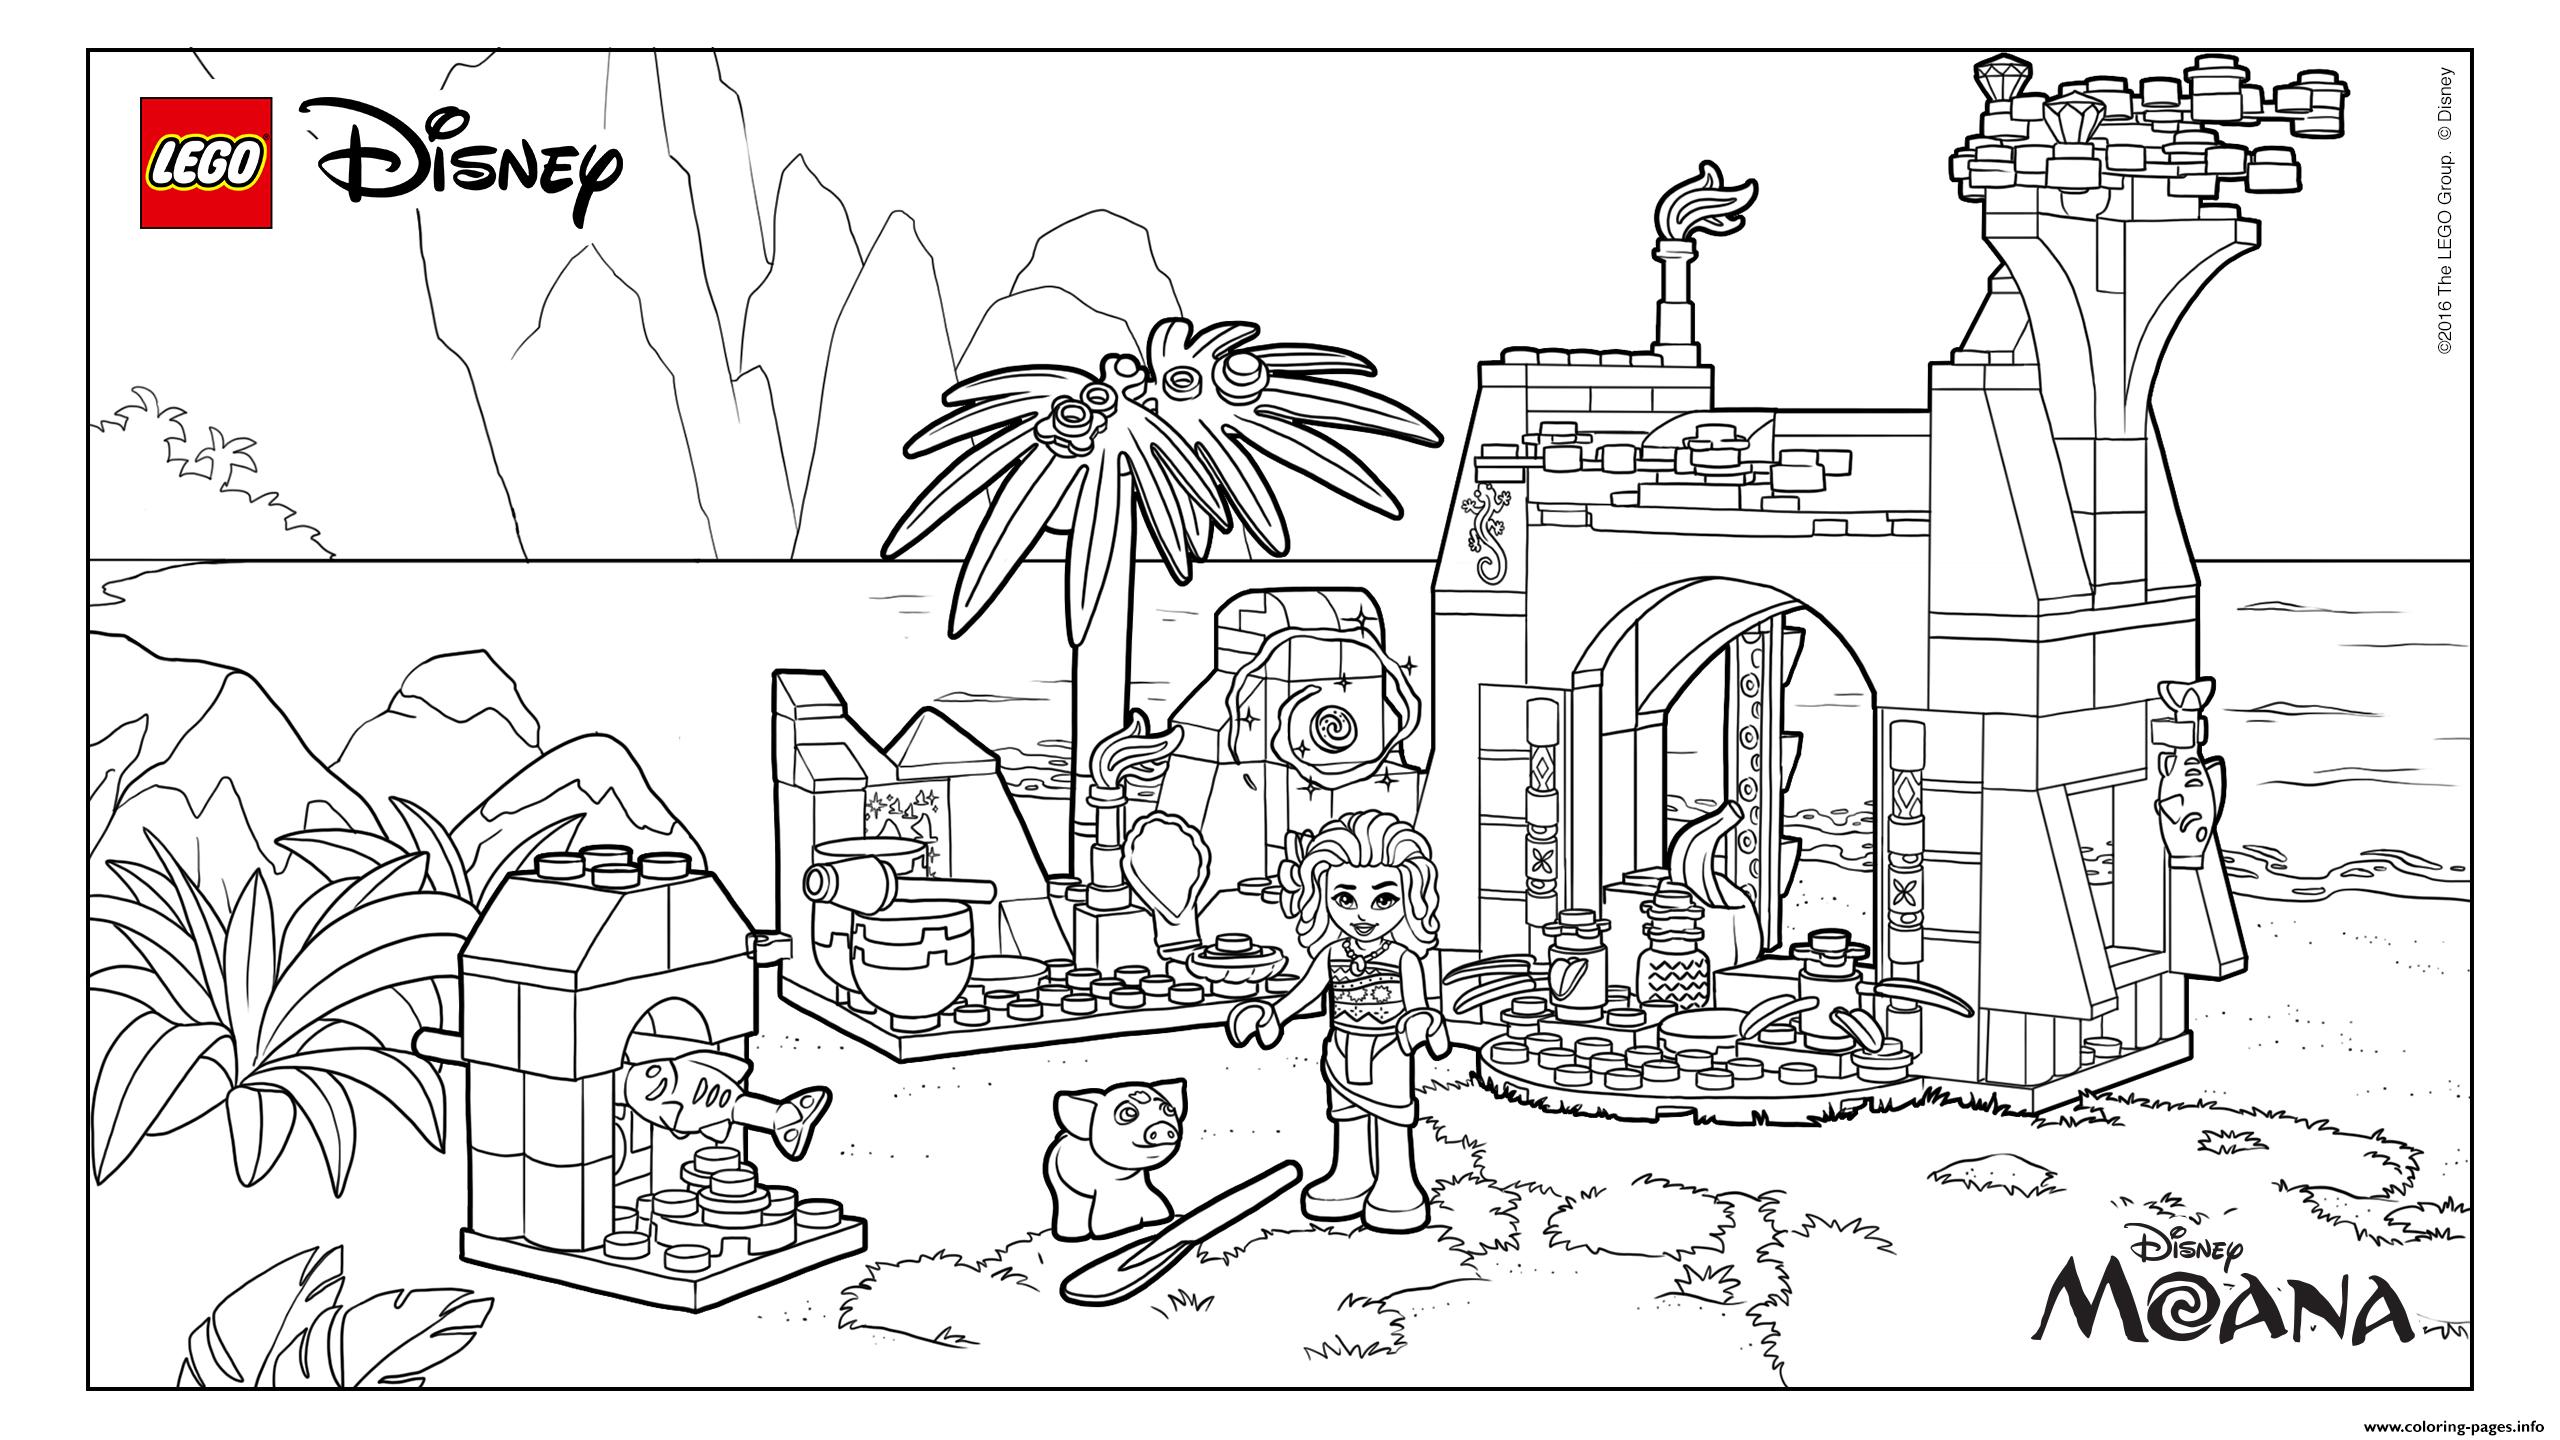 Moana Moans Beautuful Island Home Lego Disney Coloring Pages Printable